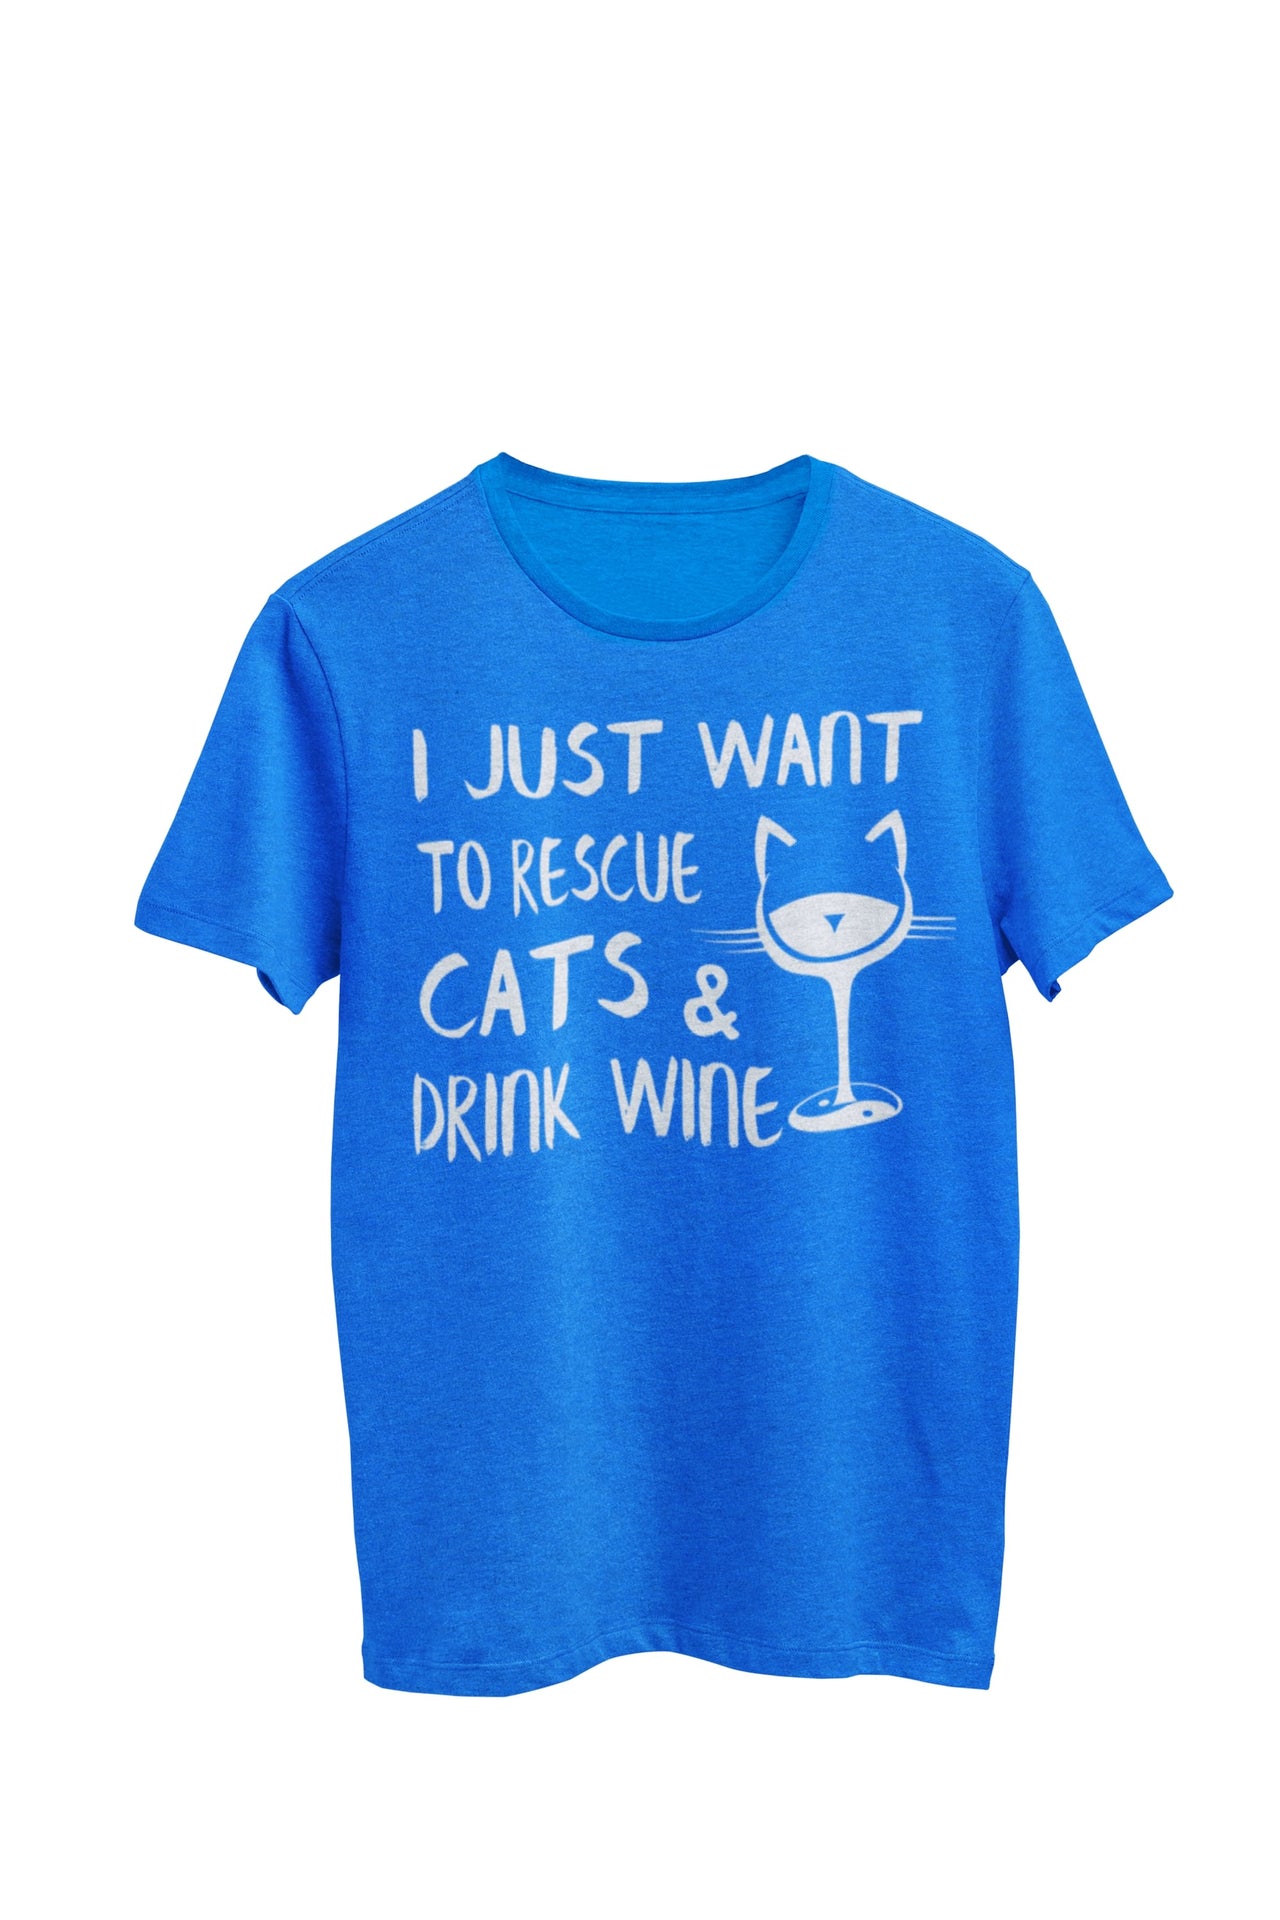 Heather Royal Blue Unisex T-shirt with the text 'I just want to rescue cats and drink wine,' featuring a charming cat adorning a wine glass with a yin yang symbol on the stem. Designed by WooHoo Apparel.